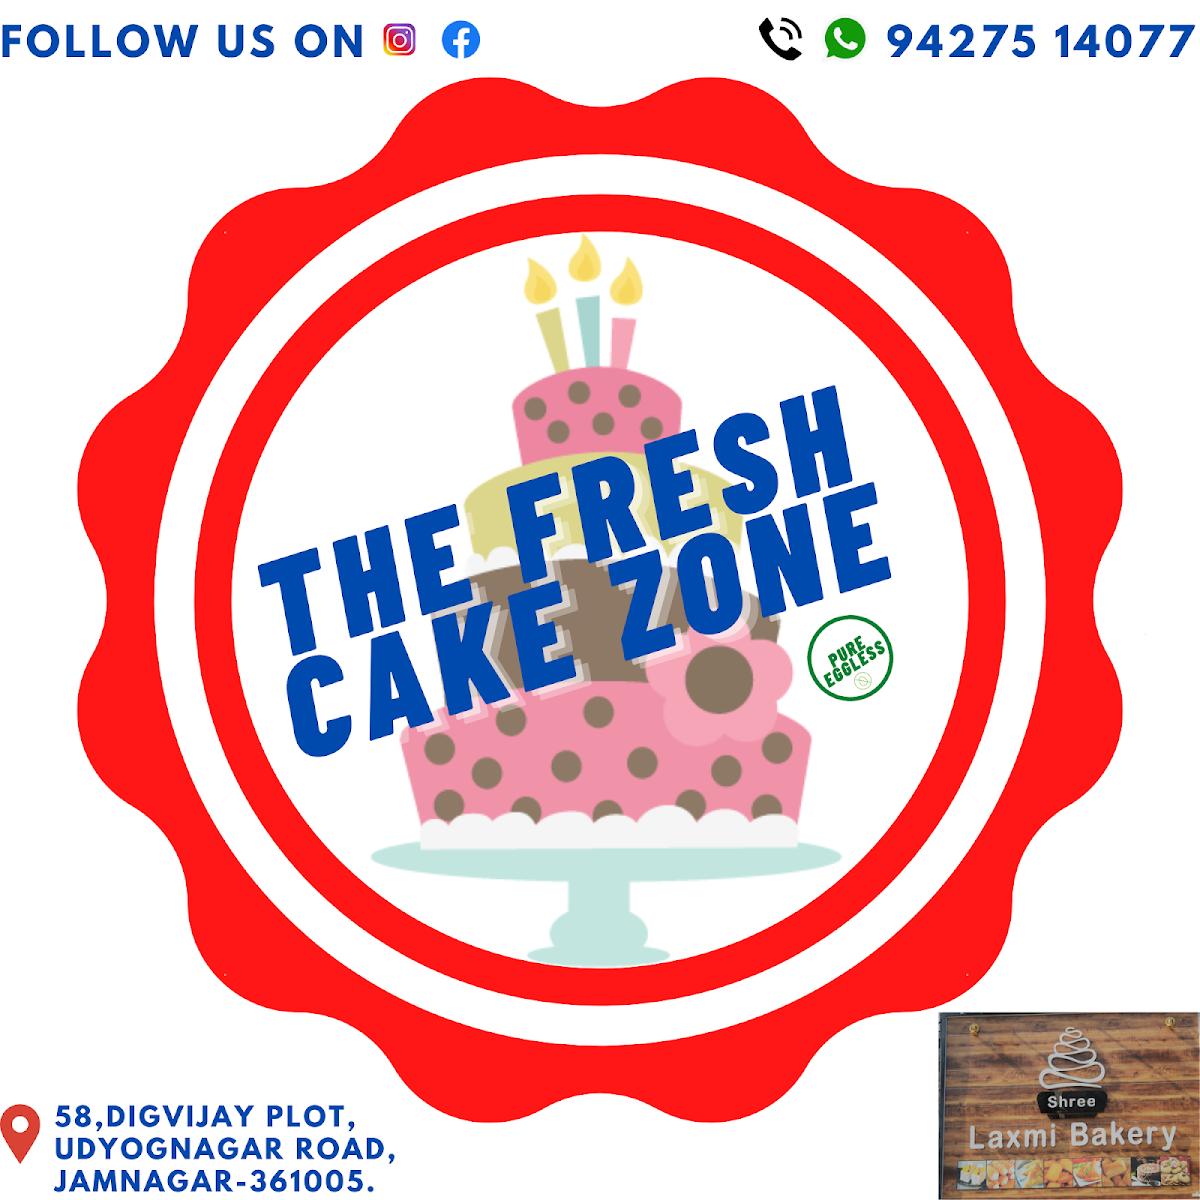 CakeZone's Jar Cakes: Perfect Desserts for Every Occasion | CakeZone -  YouTube